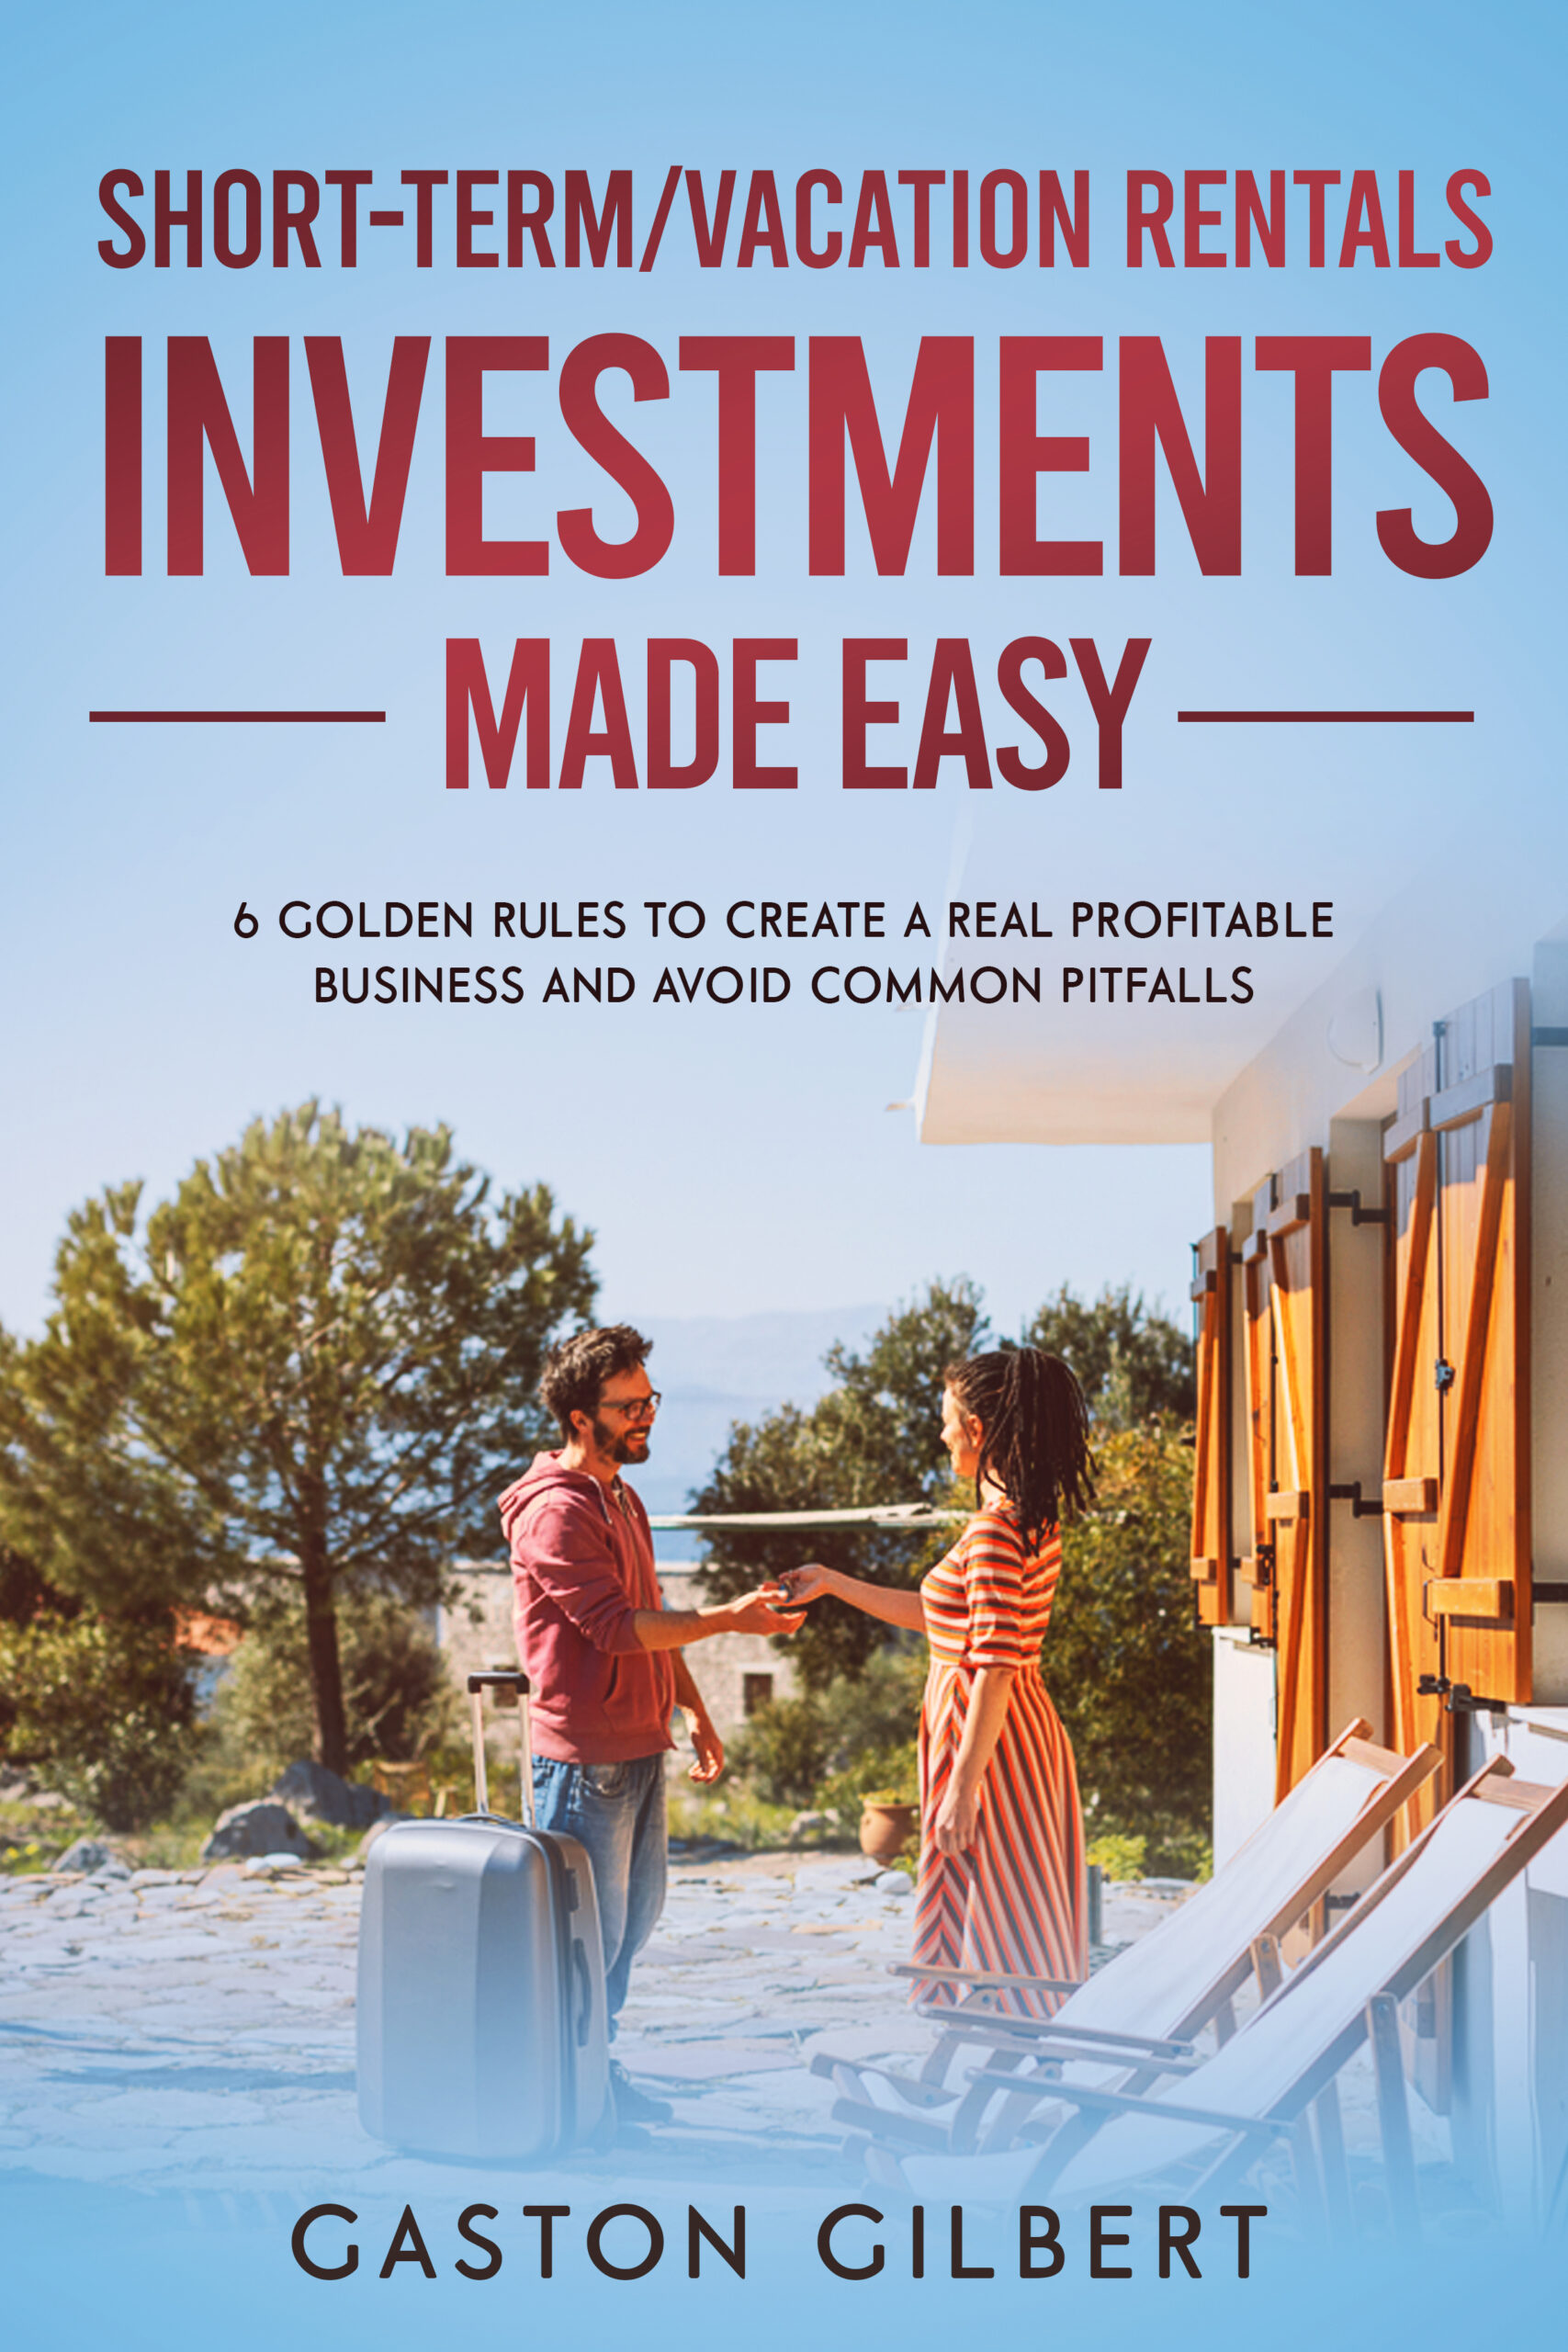 FREE: Short-Term/Vacation Rentals Investments Made Easy: 6 Golden Rules To Create A Real Profitable Business And Avoid Common Pitfalls by Gaston Gilbert